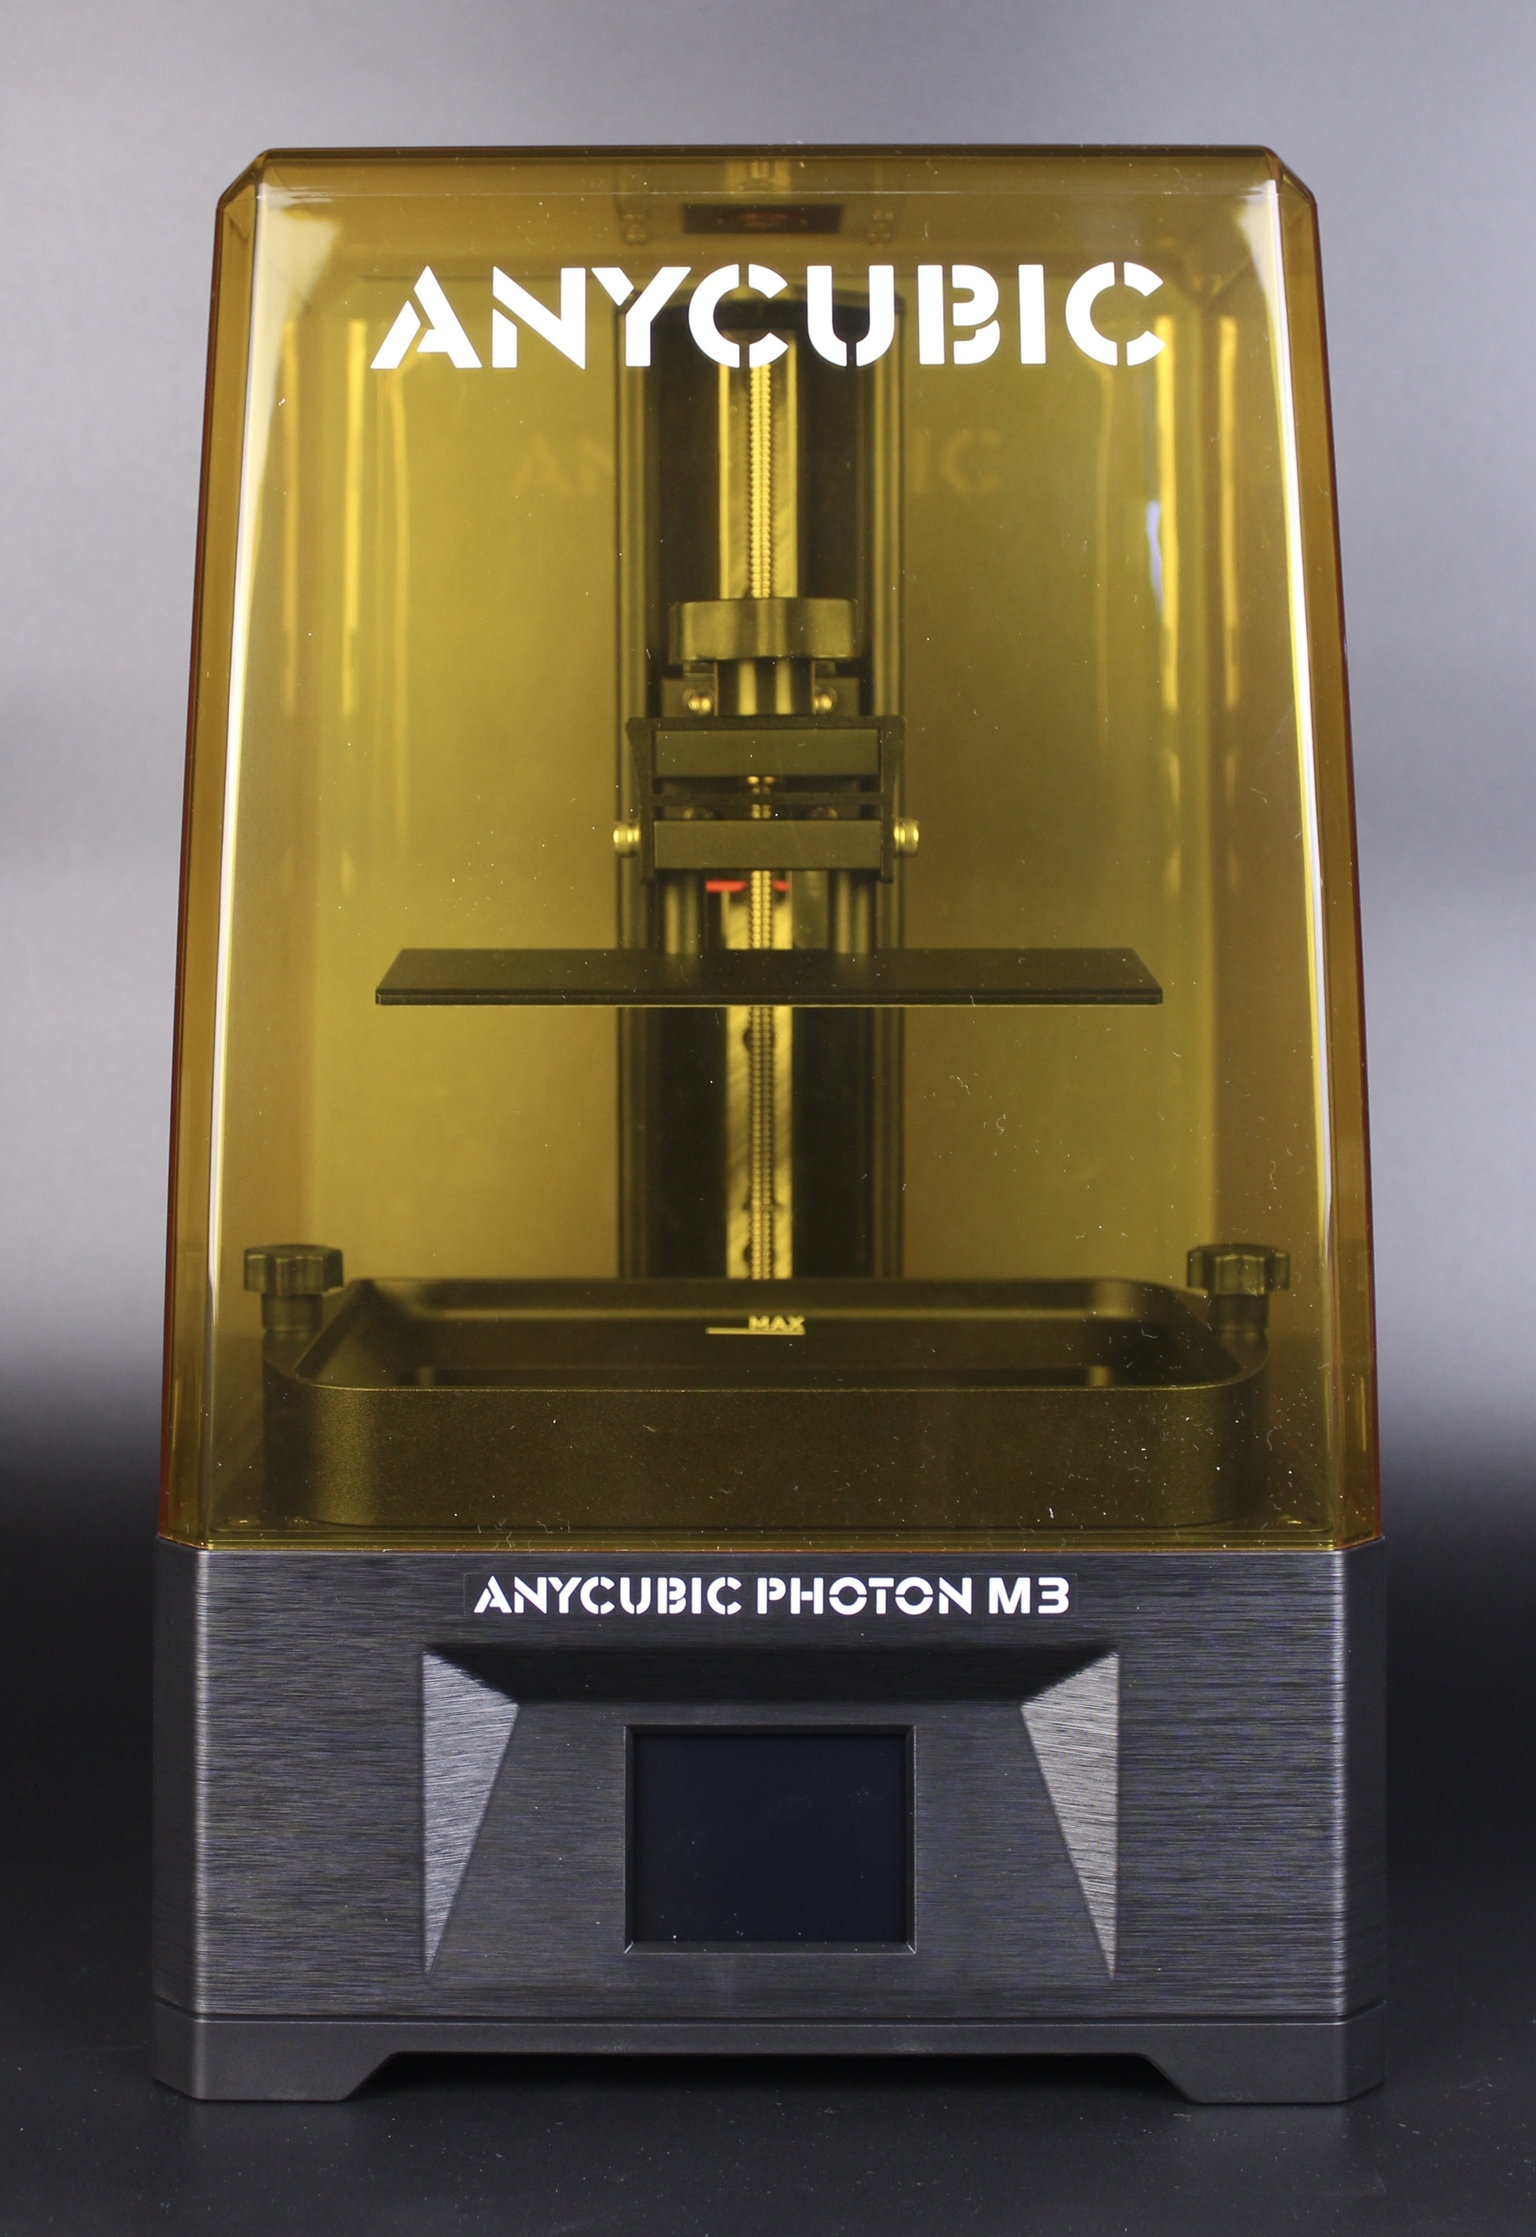 Anycubic M3 Design1 | Anycubic Photon M3 Review: Bridging the gap